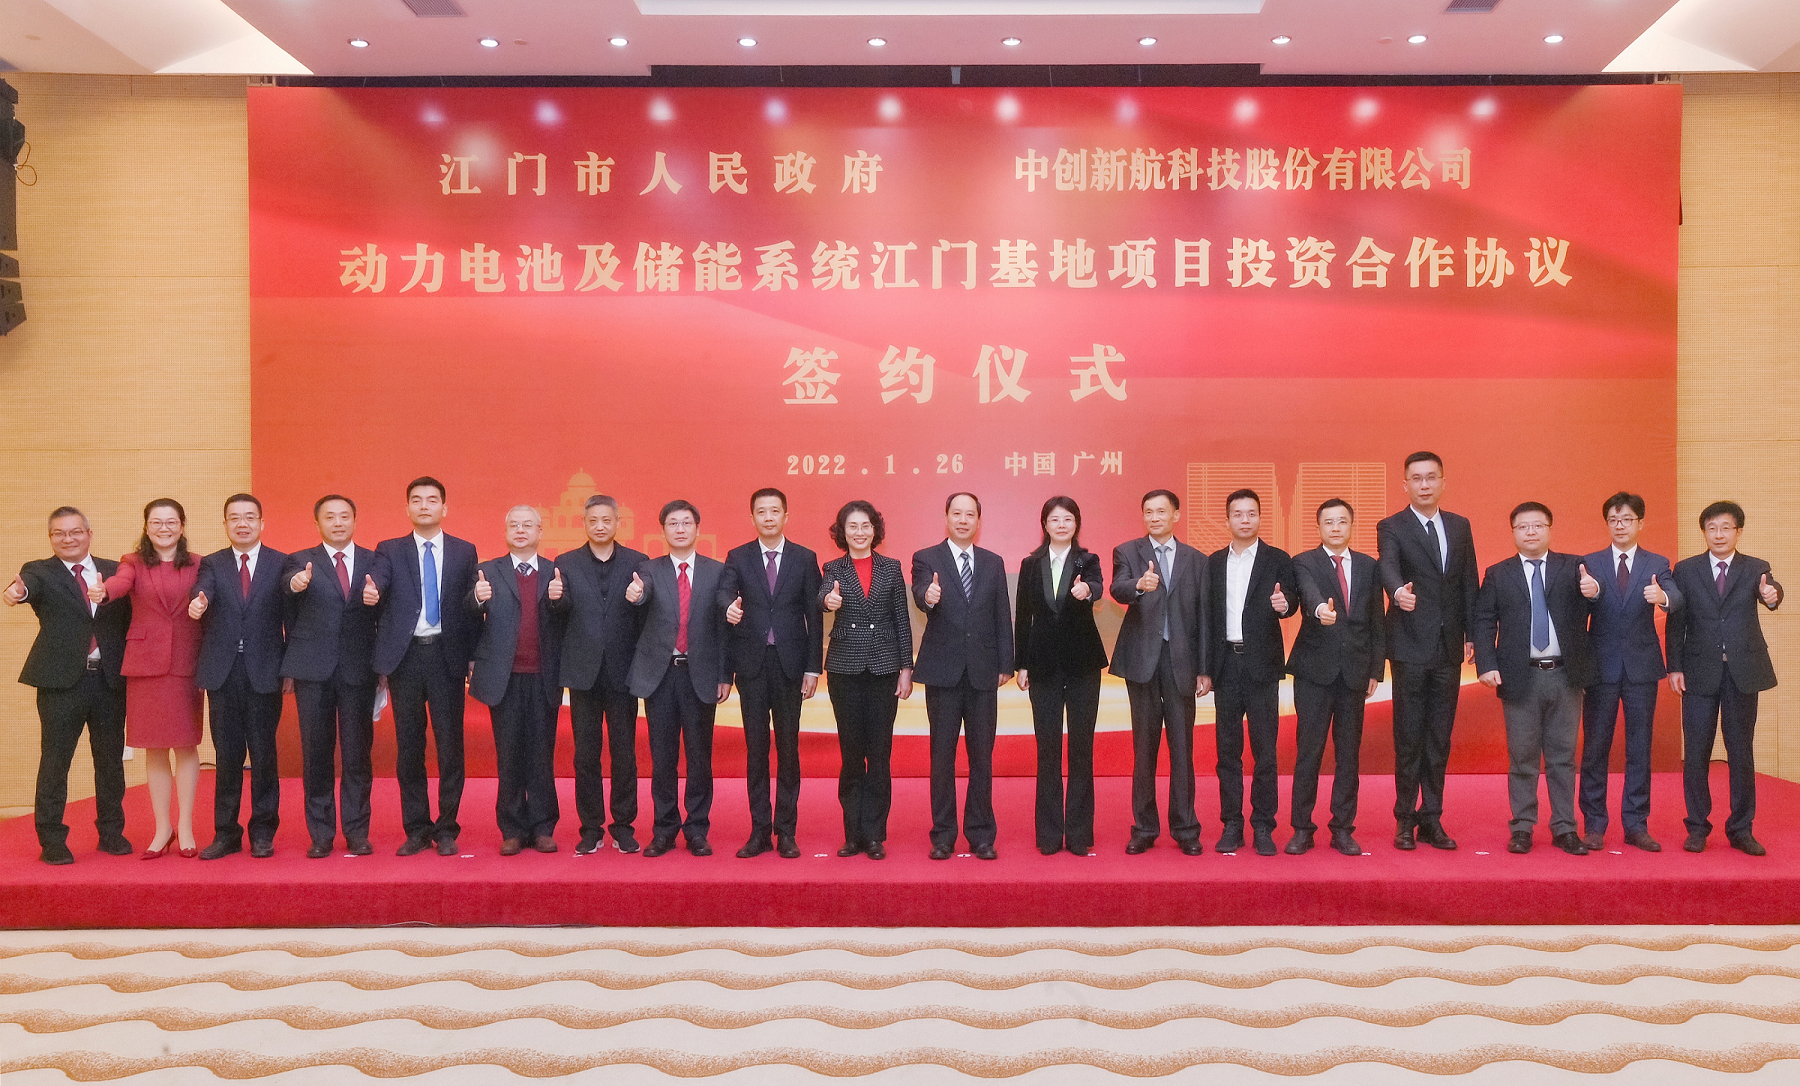 New 100GWh production capacity - CALB has signed for the Guangzhou and Jiangmen bases